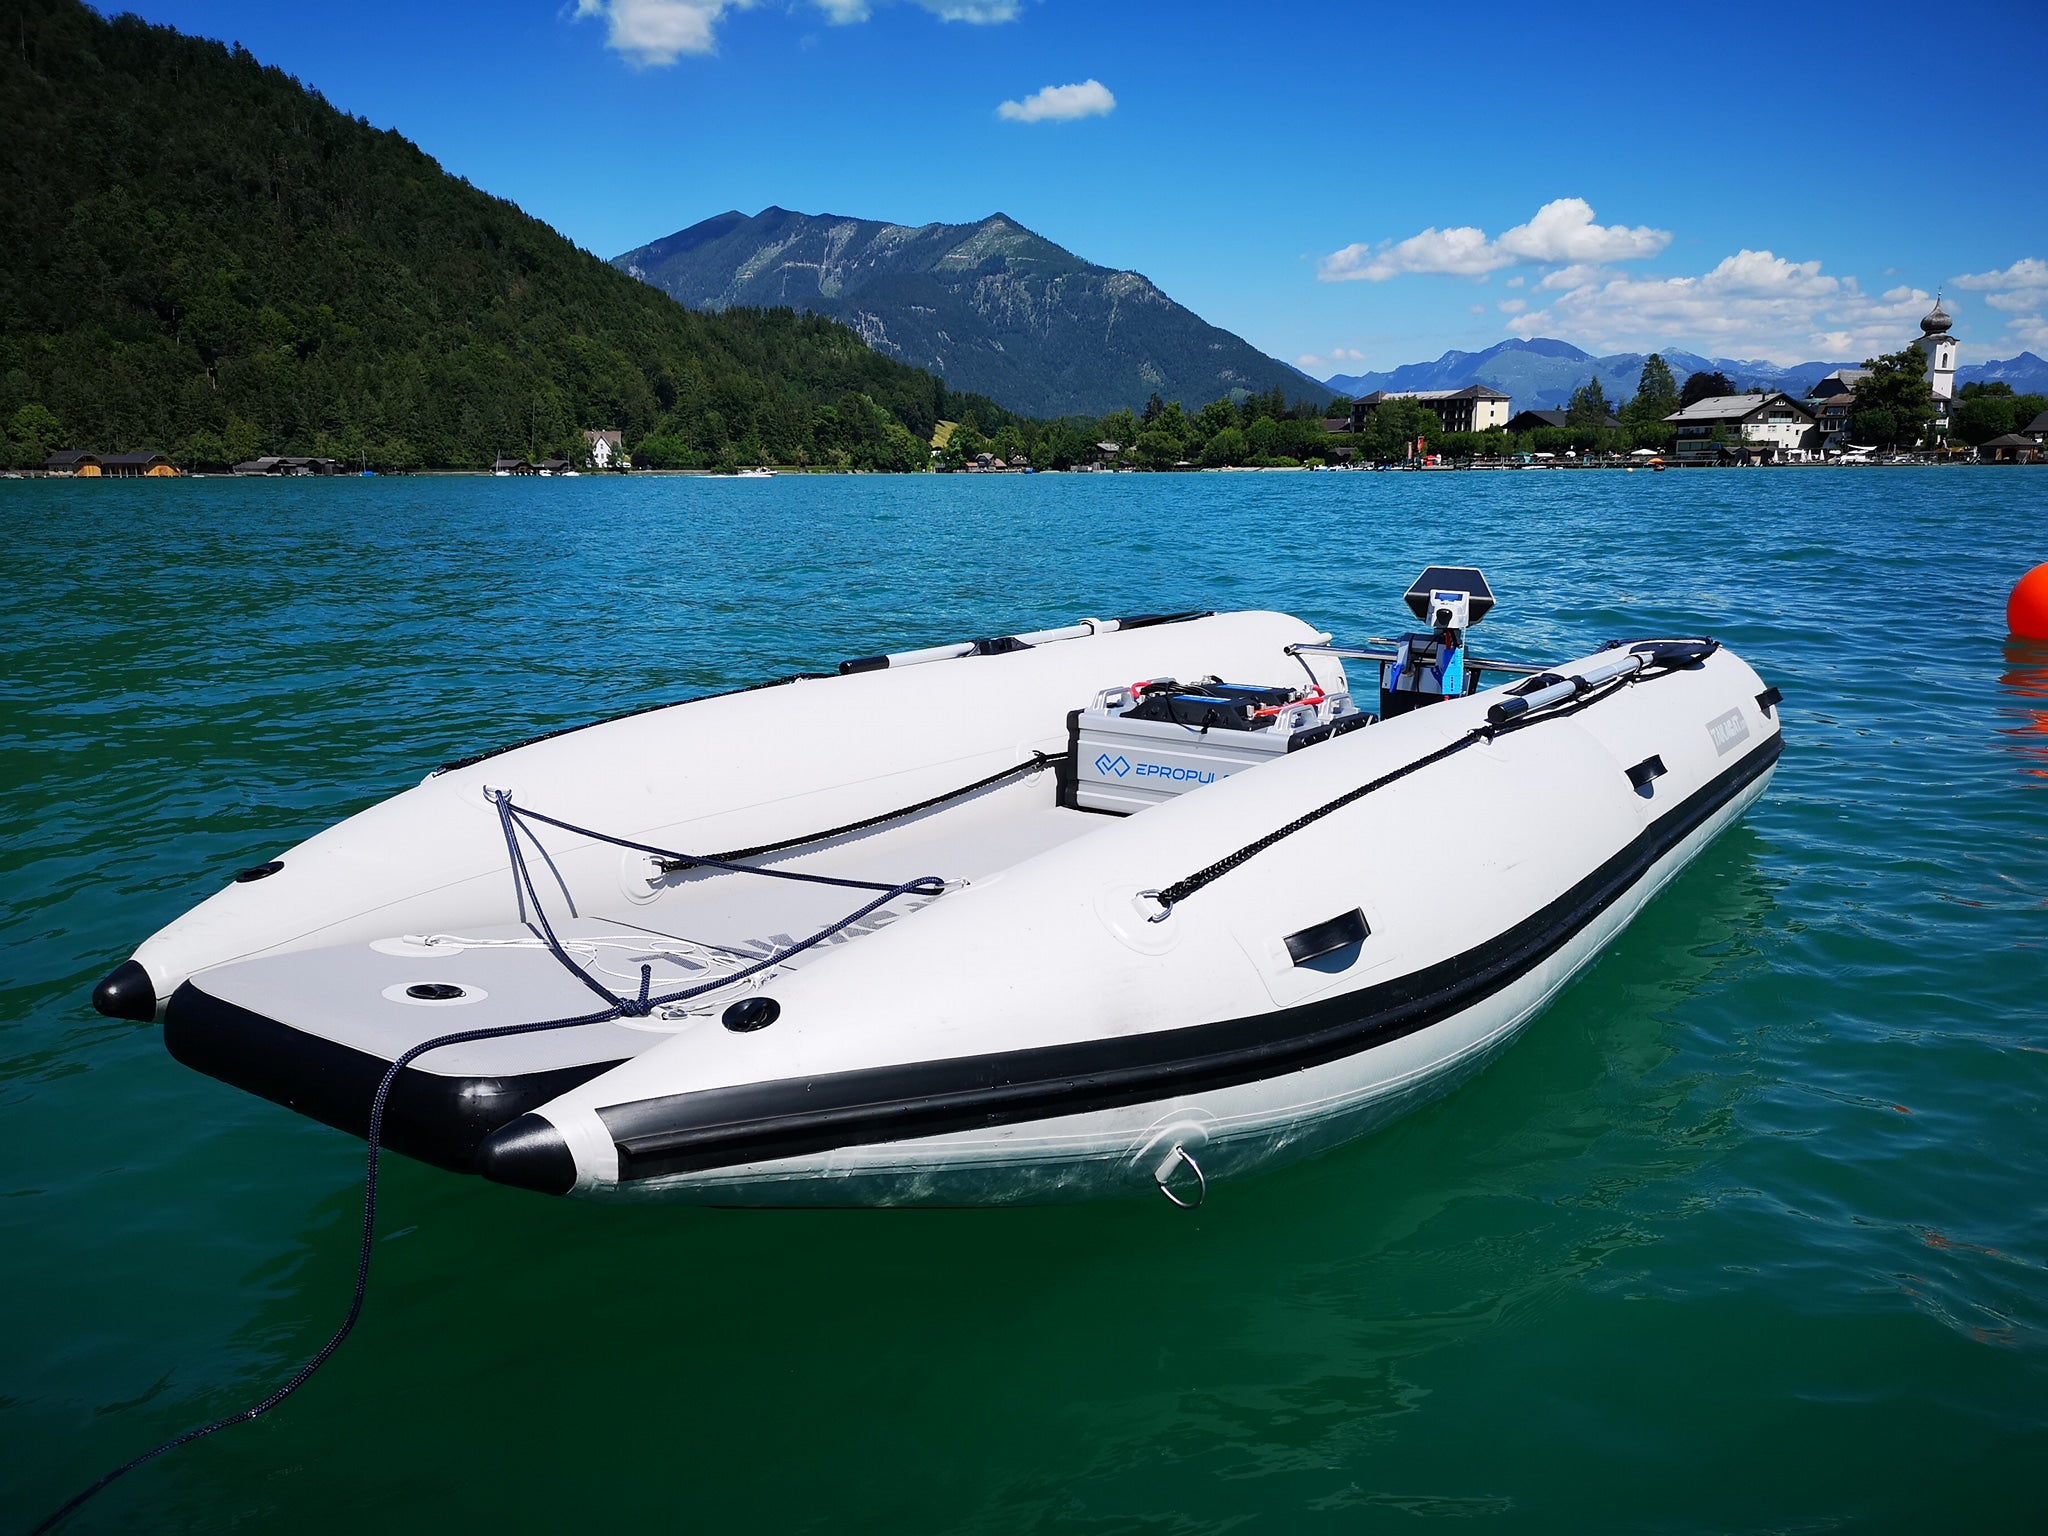 7 Factors to Consider When Buying an Inflatable Boat: Read Today!